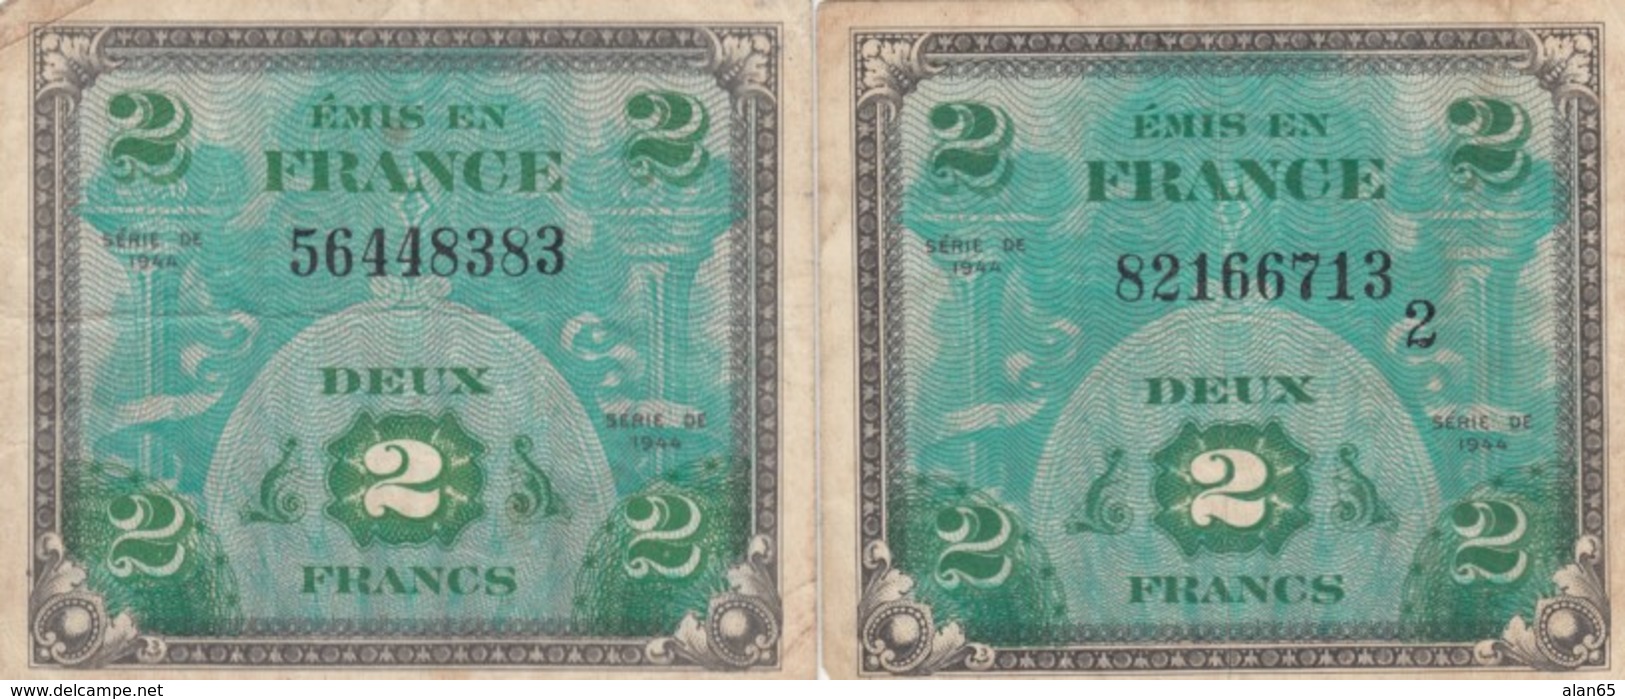 Lot Of 2 France #114a And #114b, 2 Francs 1944 Fine Banknotes, 1 Is Series 2 - 1944 Flag/France